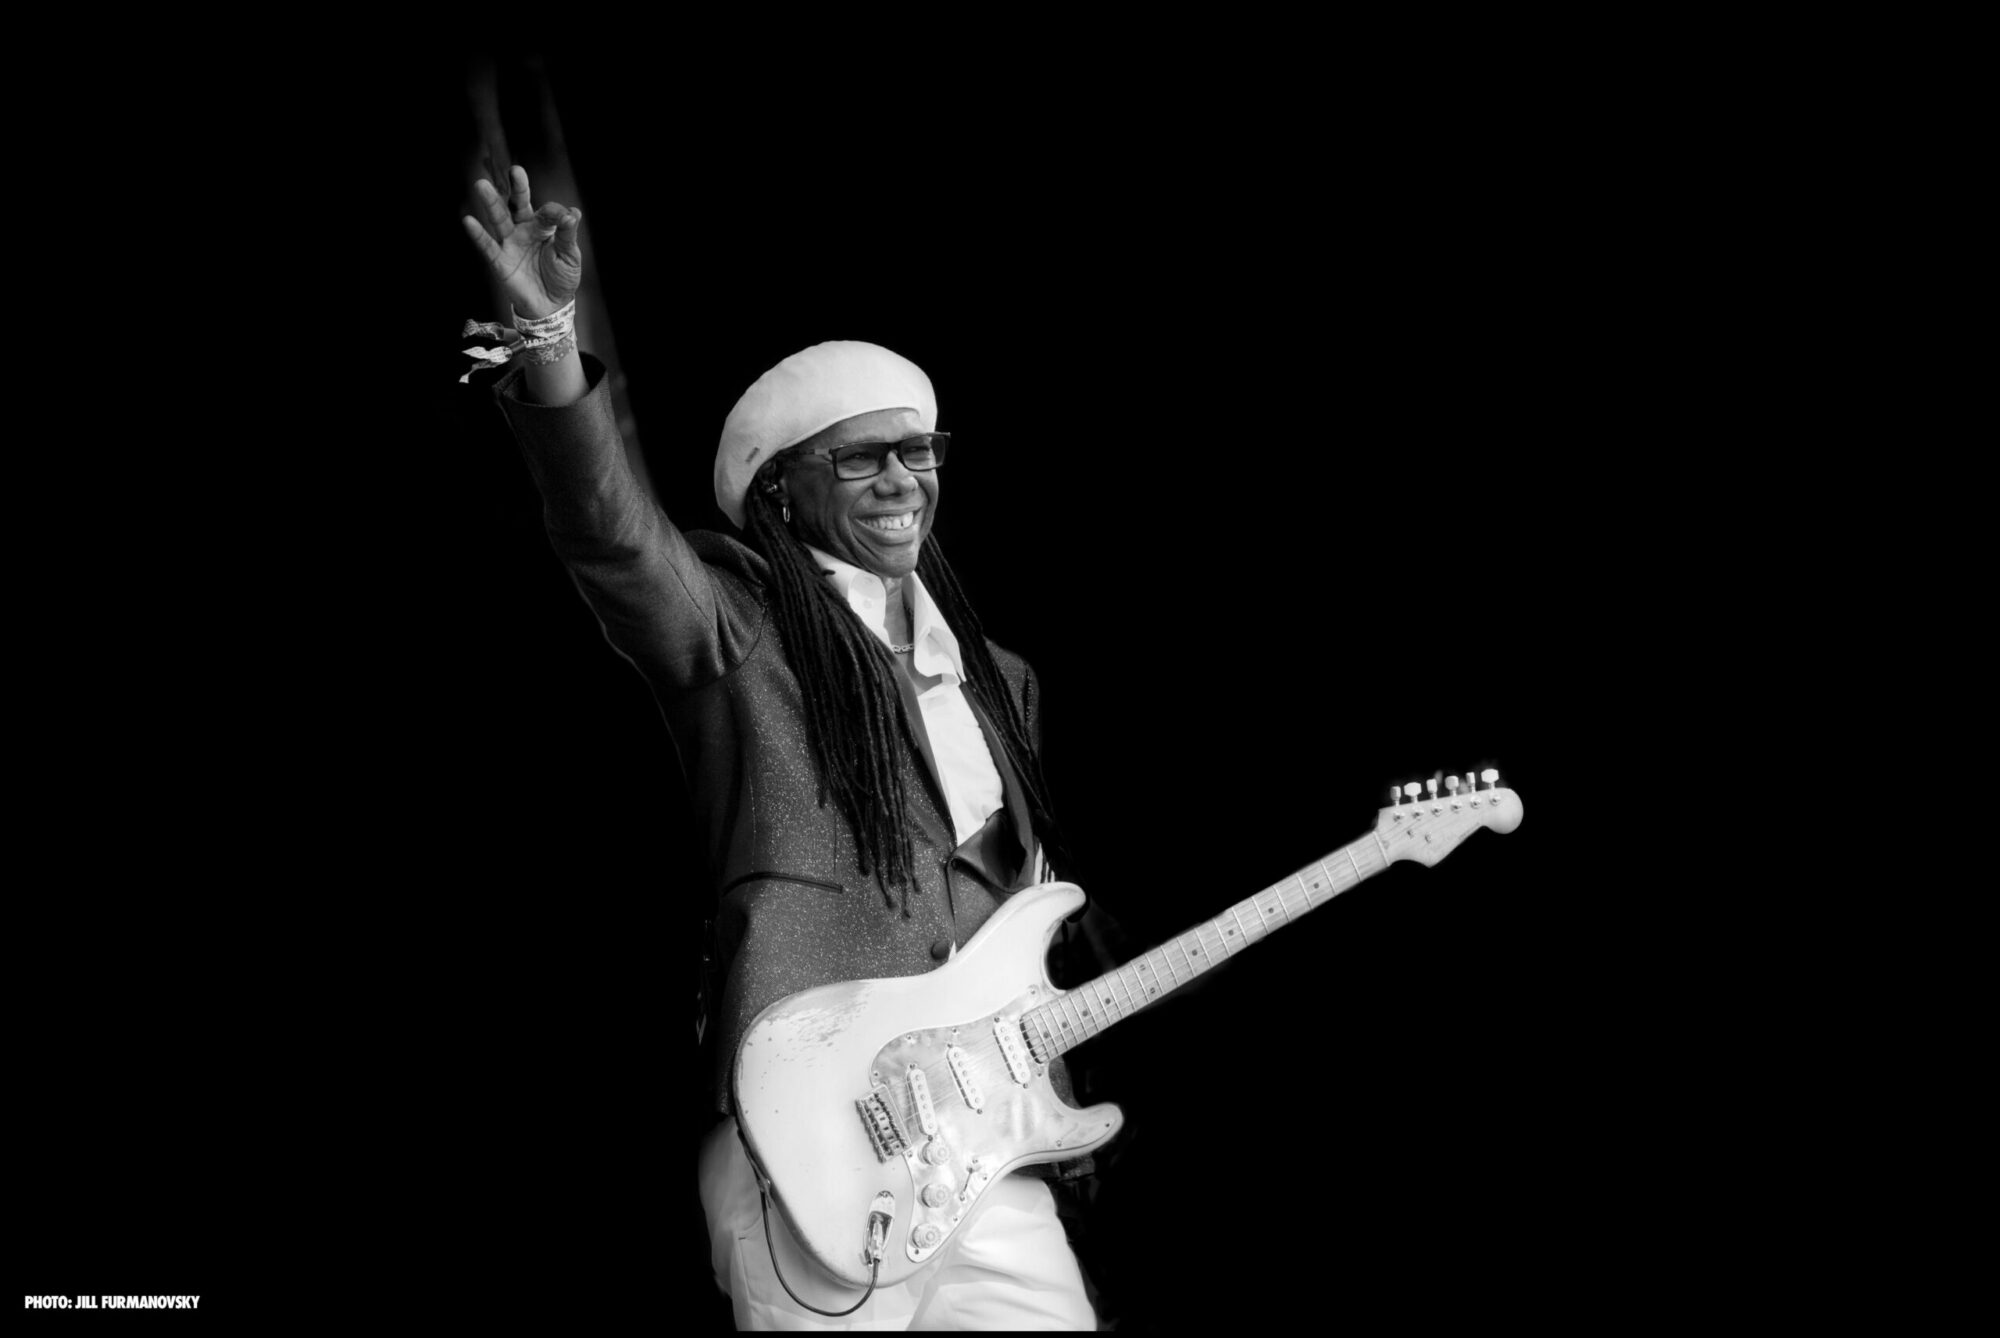 Image name Nile Rodgers and CHIC Official Ticket and Hotel Packages at Dalby Forest Yorkshire scaled the 8 image from the post Nile Rodgers and CHIC - Official Ticket and Hotel Packages at The Piece Hall, Halifax in Yorkshire.com.